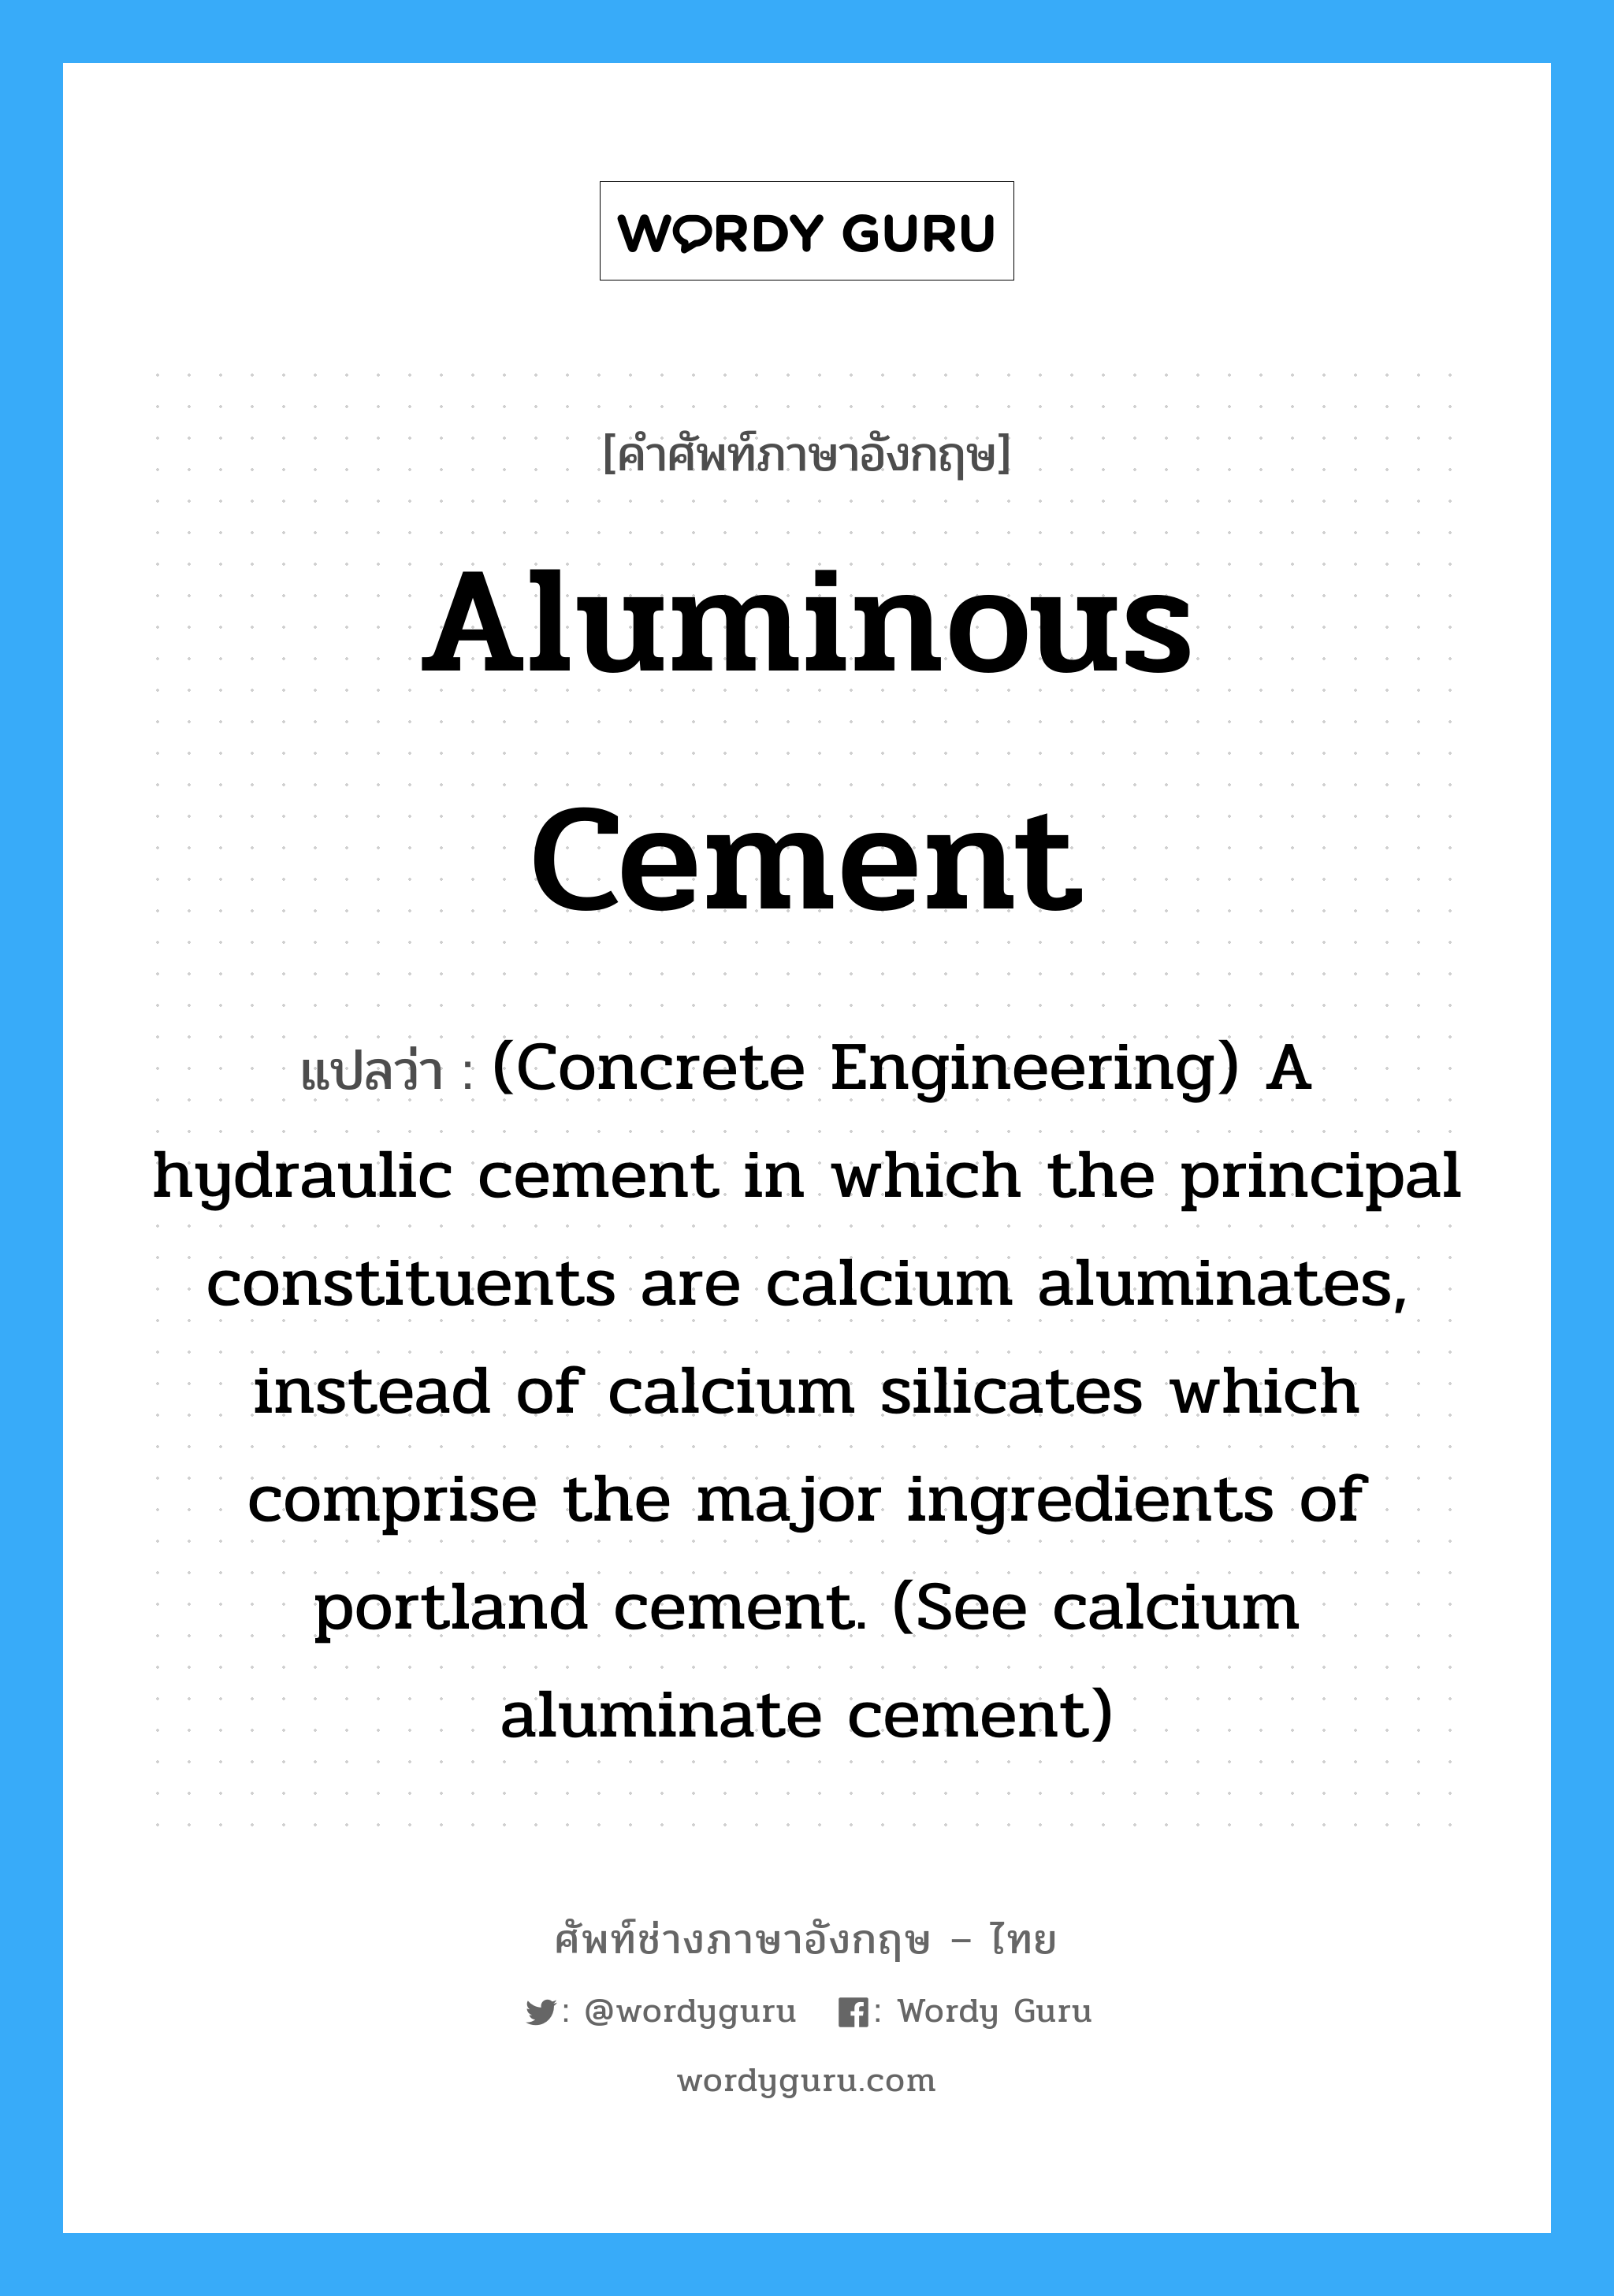 Aluminous Cement แปลว่า?, คำศัพท์ช่างภาษาอังกฤษ - ไทย Aluminous Cement คำศัพท์ภาษาอังกฤษ Aluminous Cement แปลว่า (Concrete Engineering) A hydraulic cement in which the principal constituents are calcium aluminates, instead of calcium silicates which comprise the major ingredients of portland cement. (See calcium aluminate cement)